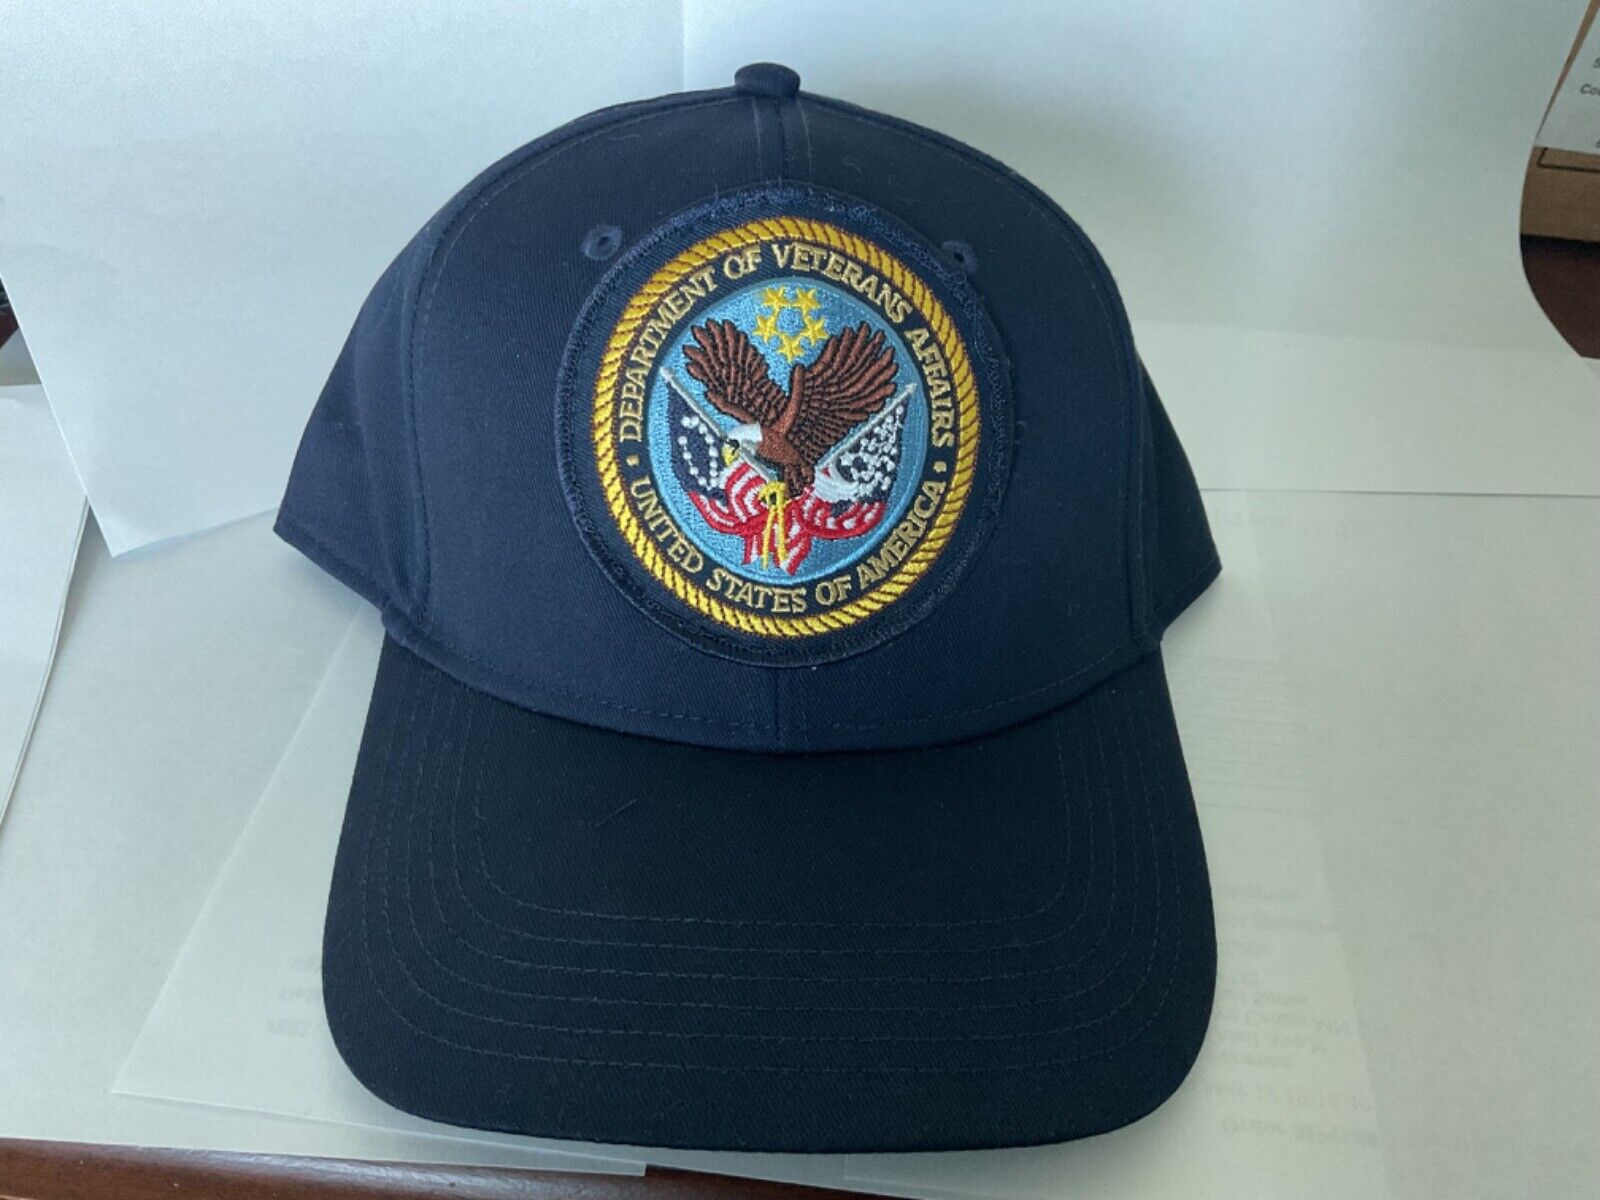 Department Of Veterans Affairs Patch/Navy blue ball cap Otto One size fits most